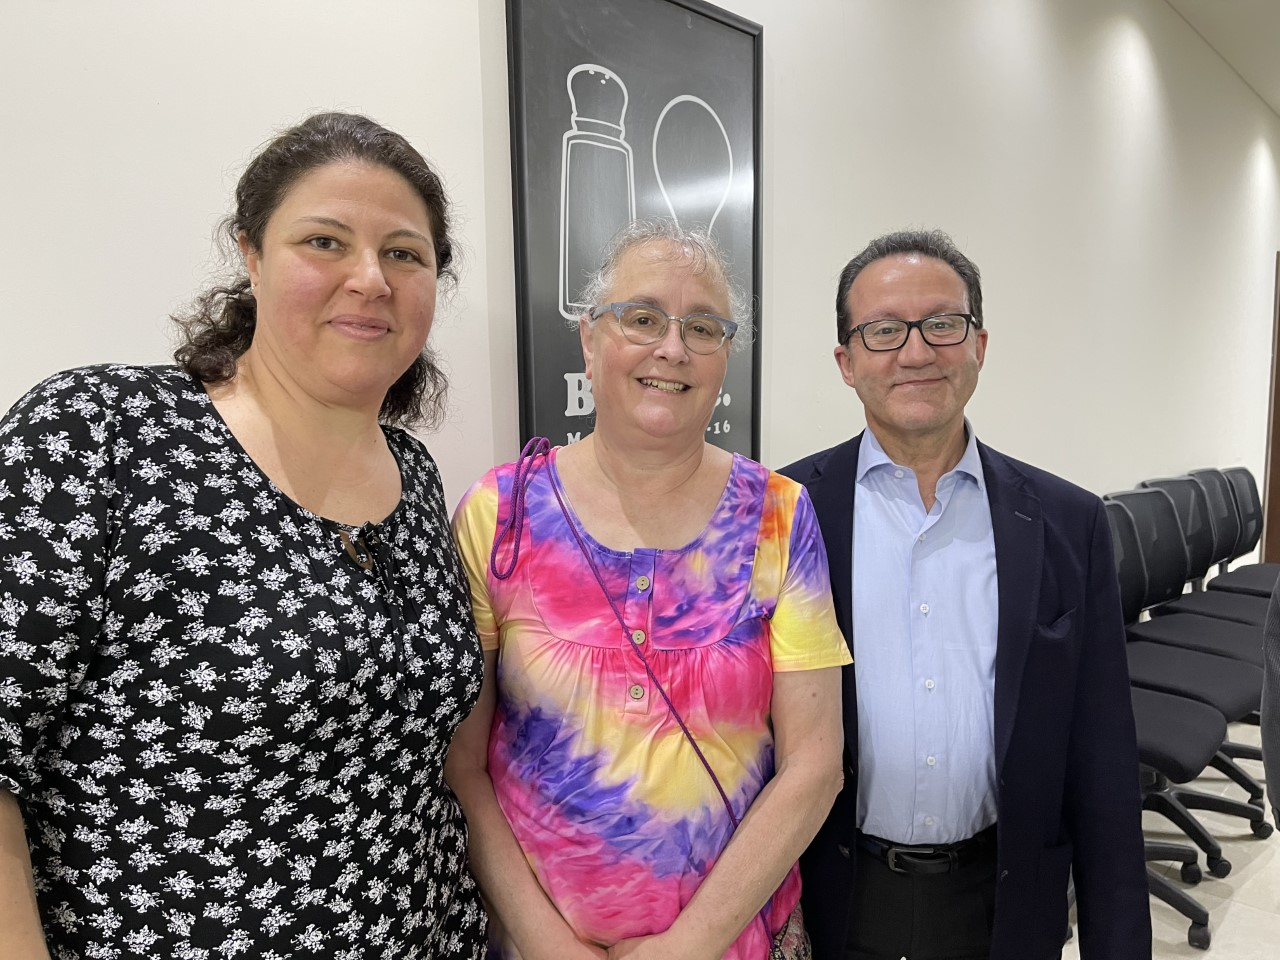  Later in the day, we met with some of the board which oversees Home of Hope and shared our mutual commitment to Christ’s work around the world. Julie is seen here with Carol Sahyoun Khalil and Philip Hajj. Carol runs a small, private school and Phil